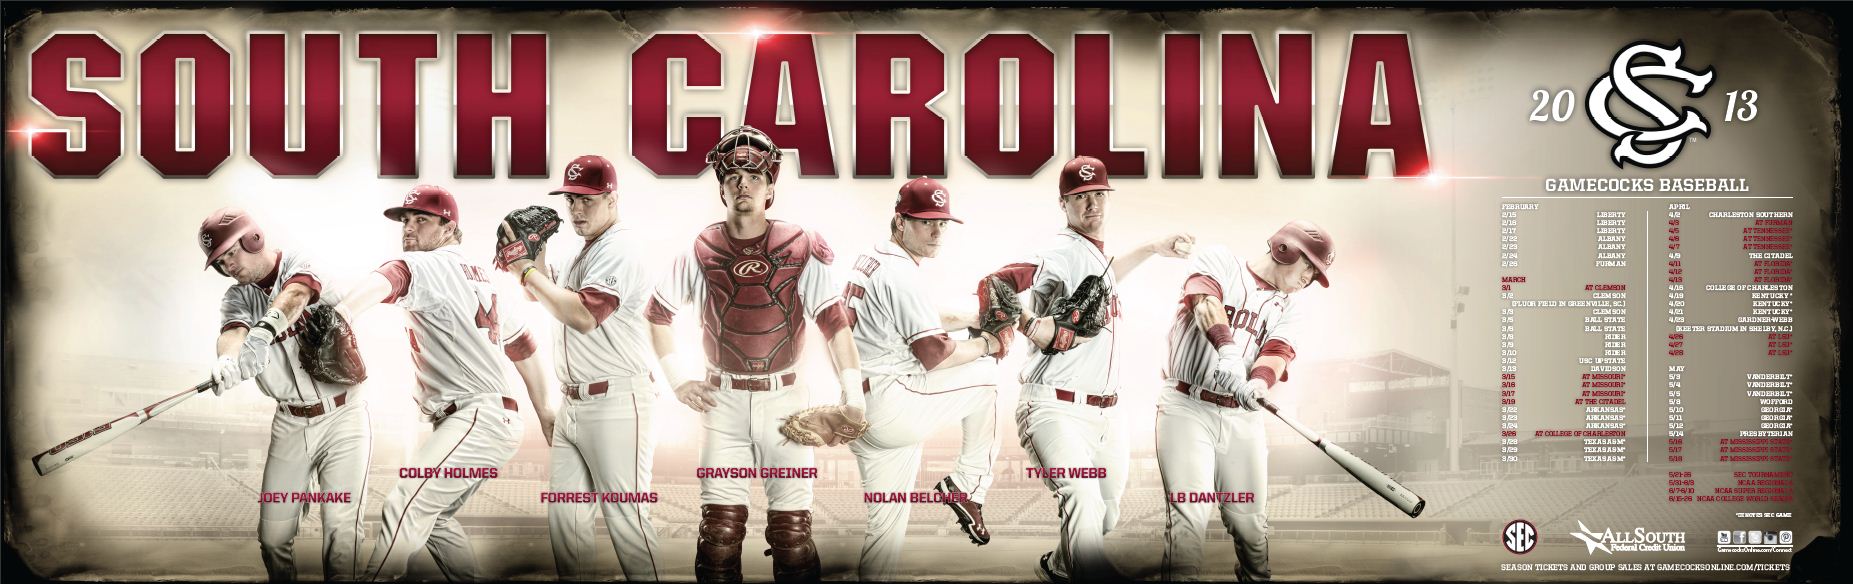 Free Download Gamecock Baseball South Carolina Team The Usc Athletic Page 1853x584 For Your Desktop Mobile Tablet Explore 49 Gamecock Wallpaper 2015 South Carolina Gamecocks Wallpaper Border Gamecock Wallpapers